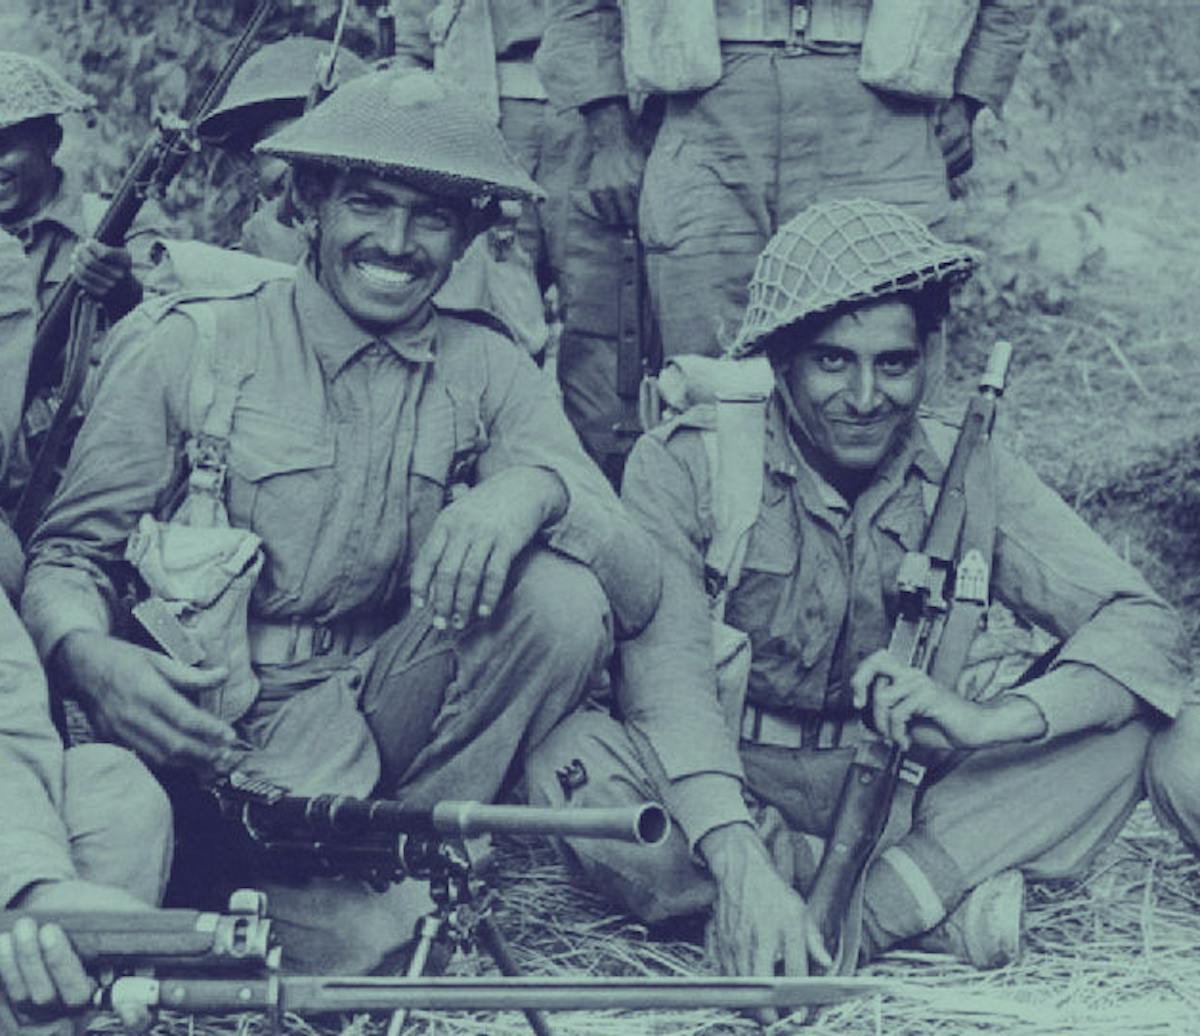 Indian soldiers in World War 2